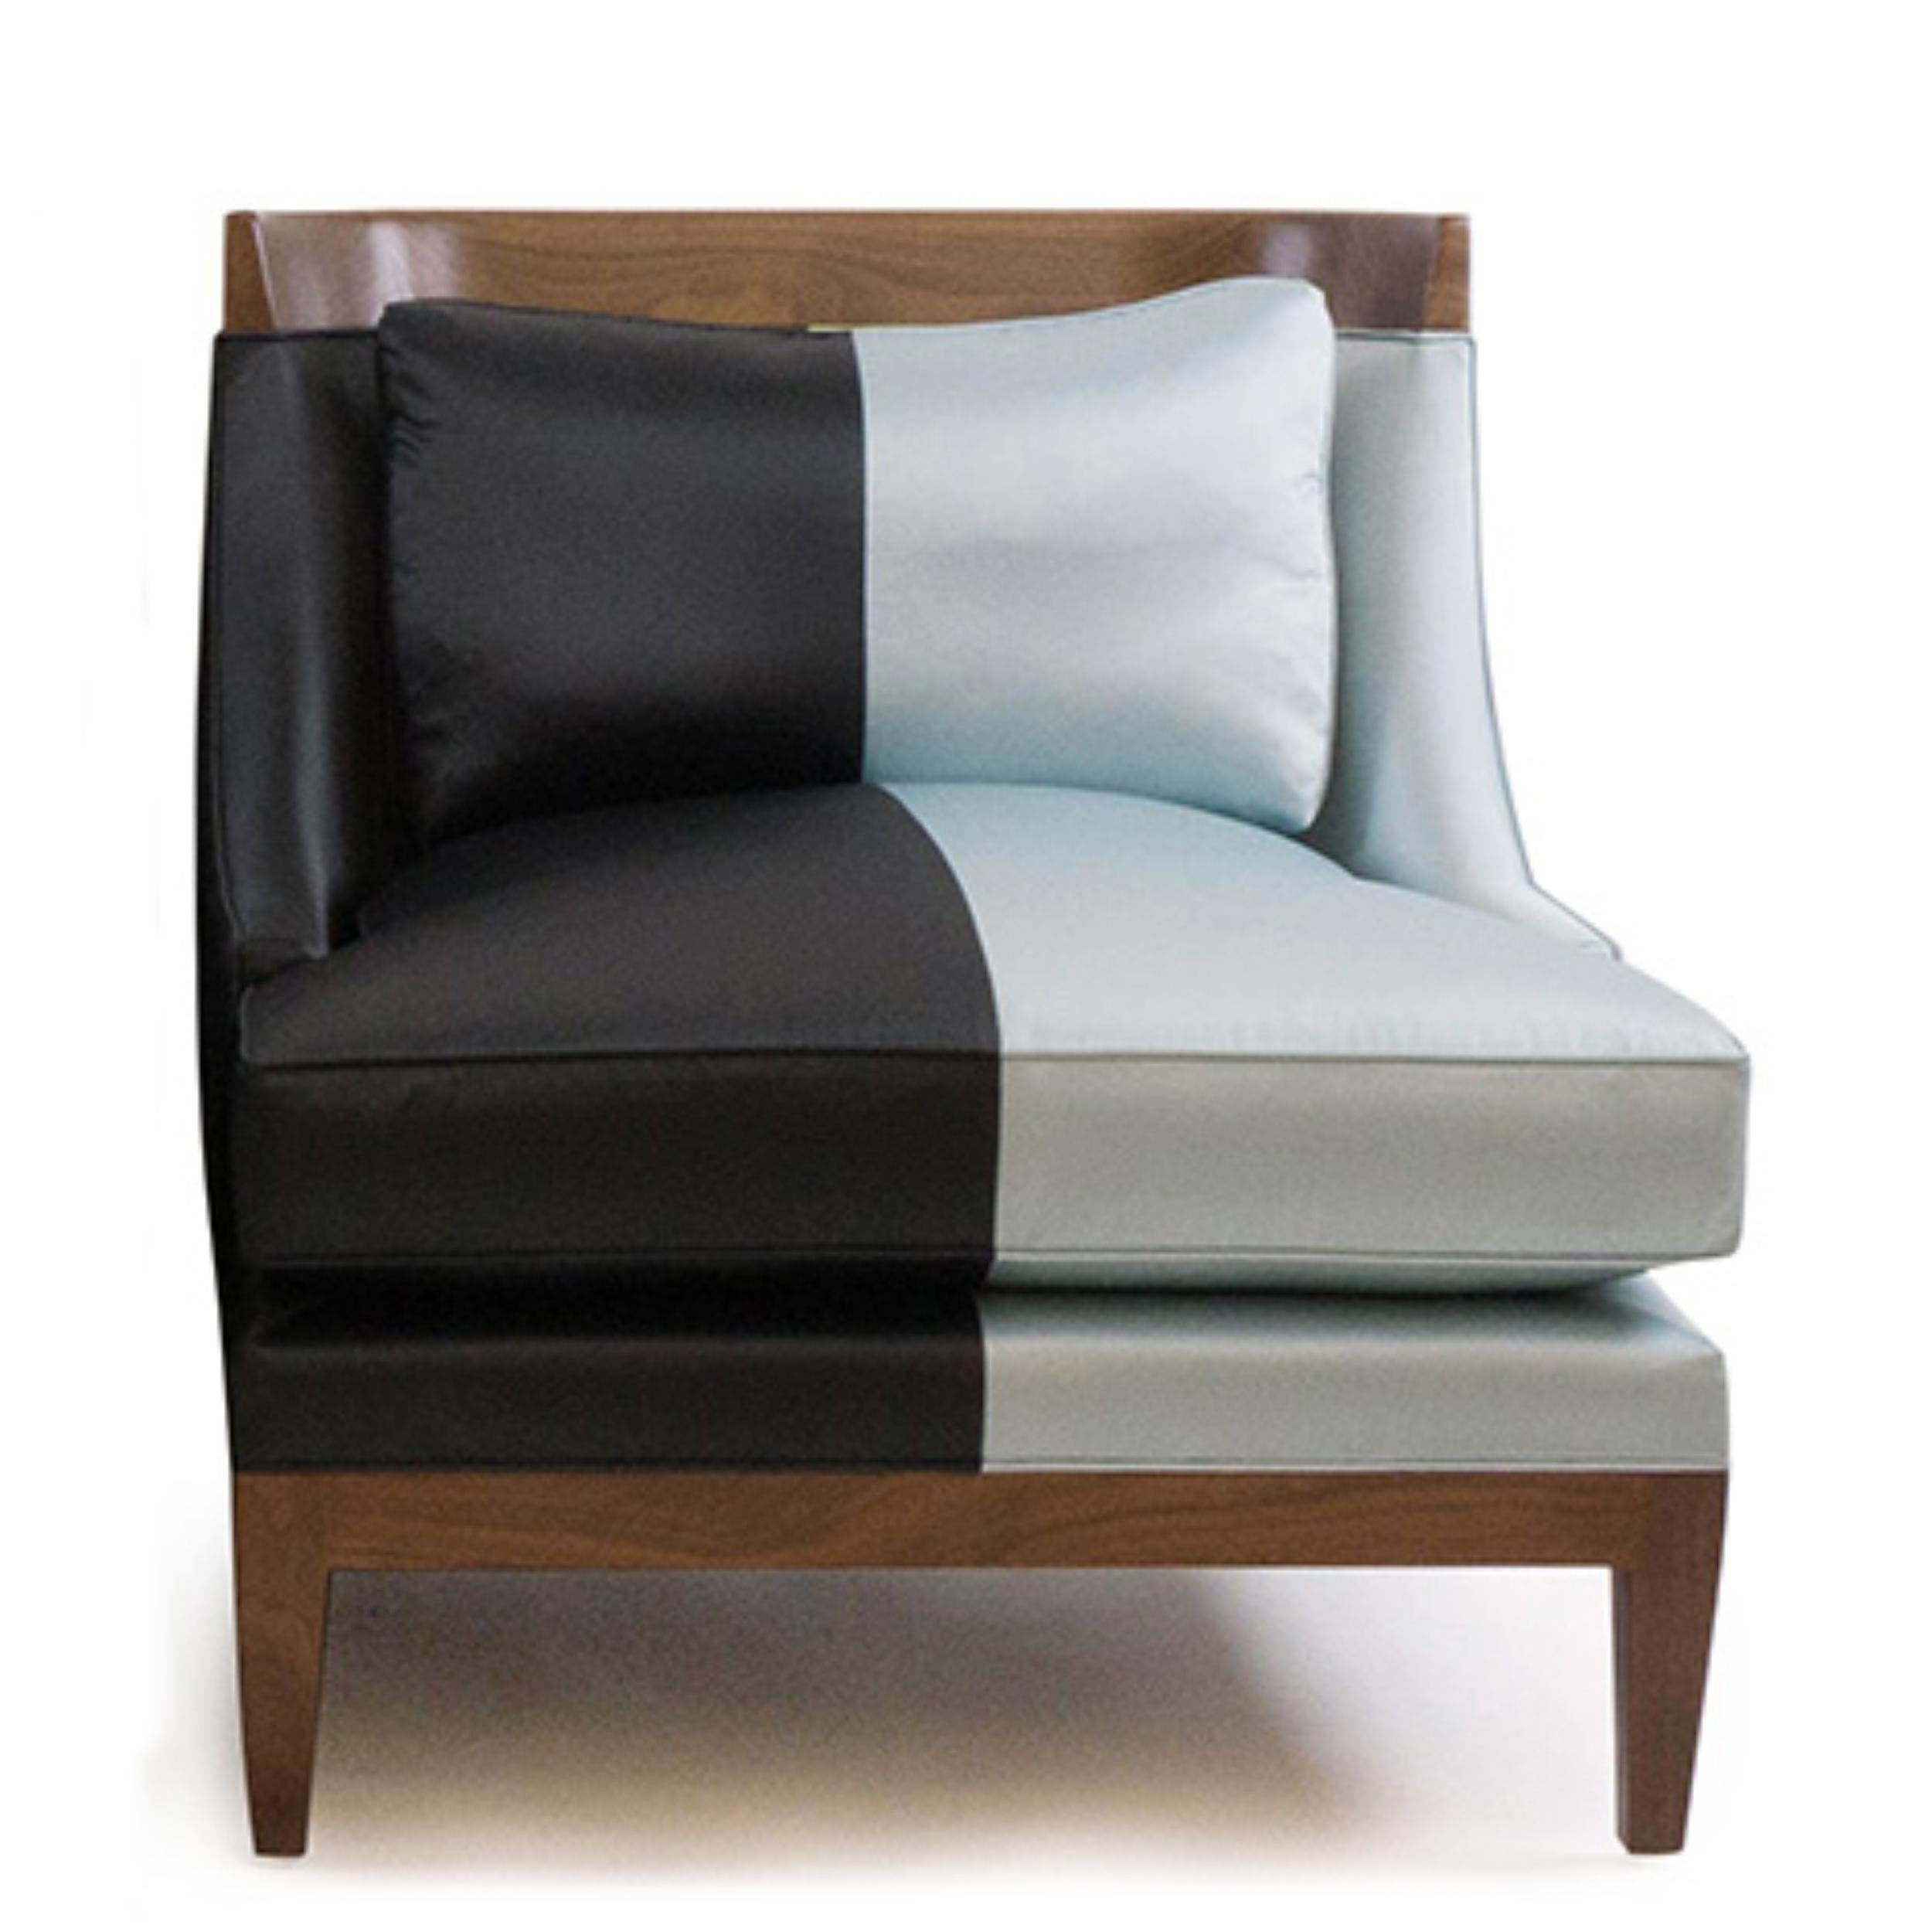 Club chair inspired by Mid-Century Modern style. Covered in black & blue silk combination. Deep seat is both comfortable and elegant. Extra-stuffed down/feather-wrapped foam loose seat cushion sits atop an 8-way hand tied spring base. Loose pillow